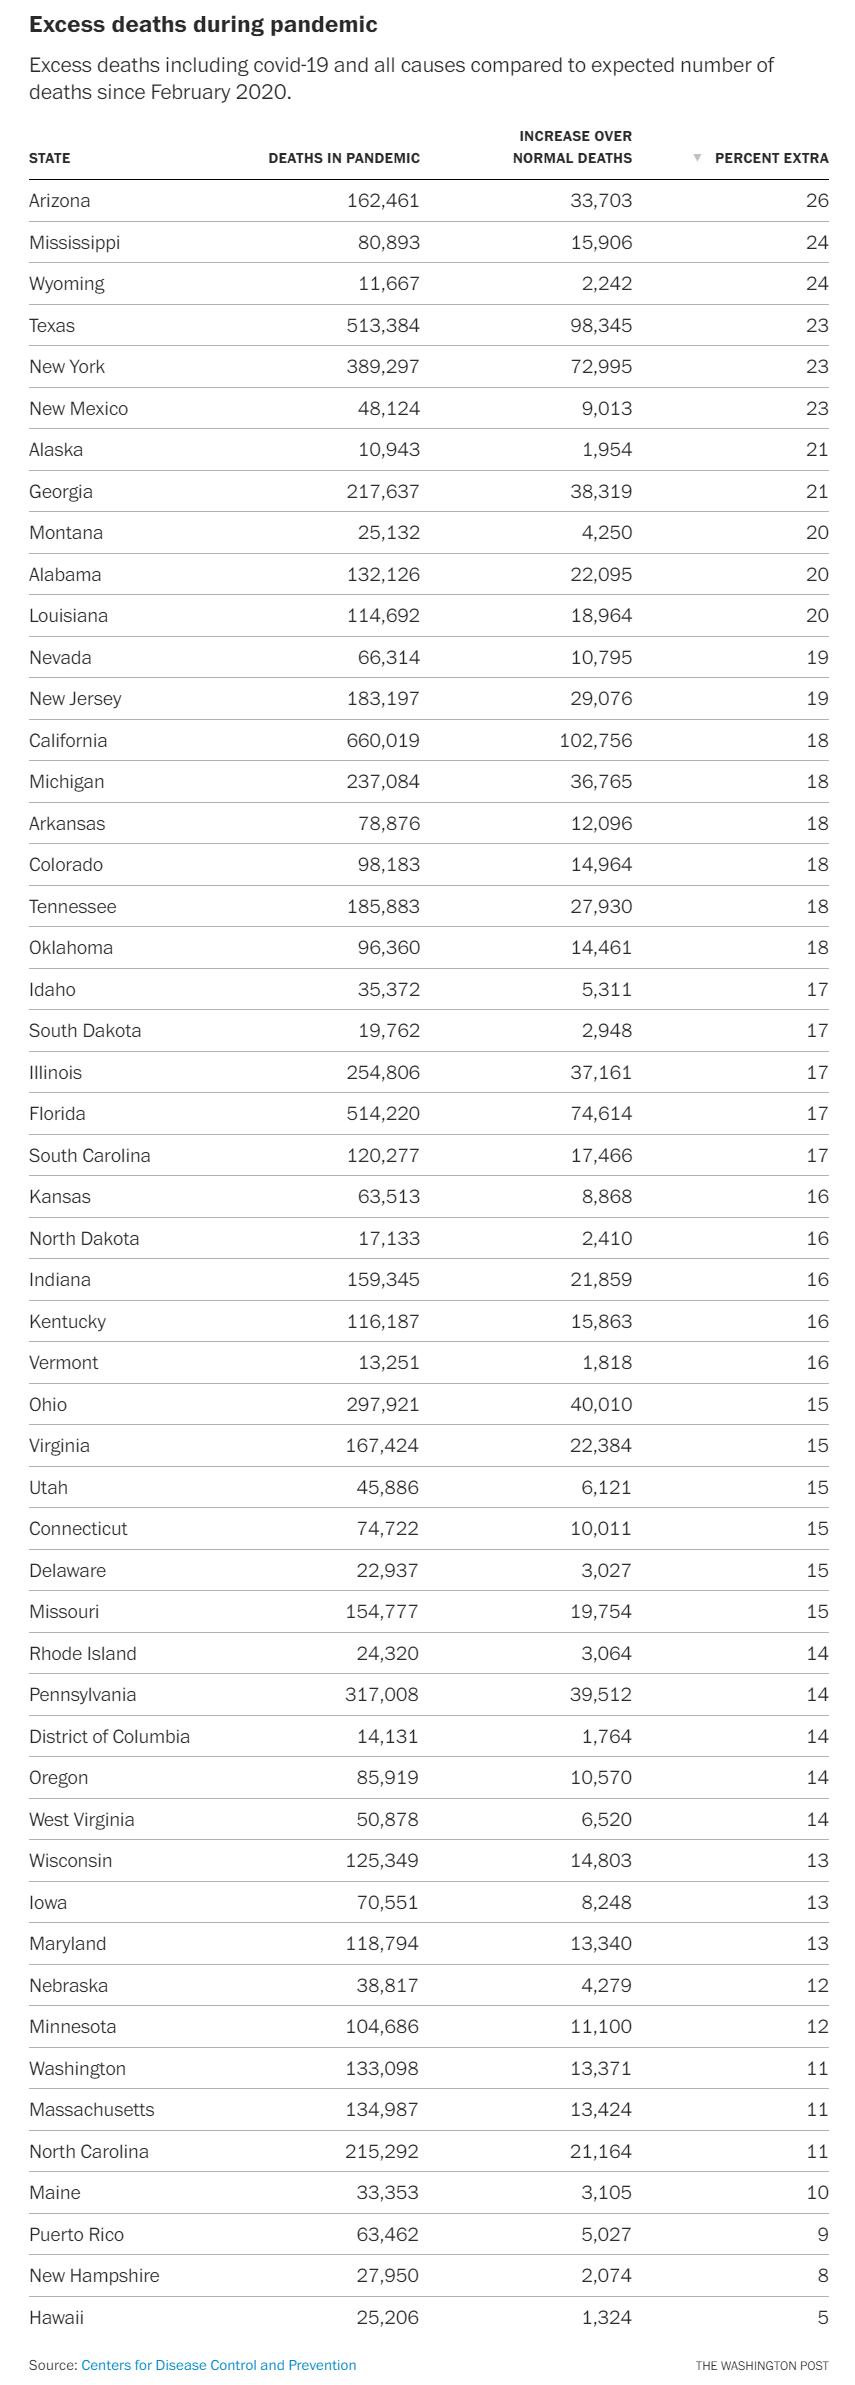 Excess deaths in each U.S. state including COVID-19 and all causes compared to expected number of deaths since February 2020. Arizona had the most excess deaths at 26 percent, and Hawaii had the least, at 5 percent. Data: CDC. Graphic: Dan Keating / The Washington Post